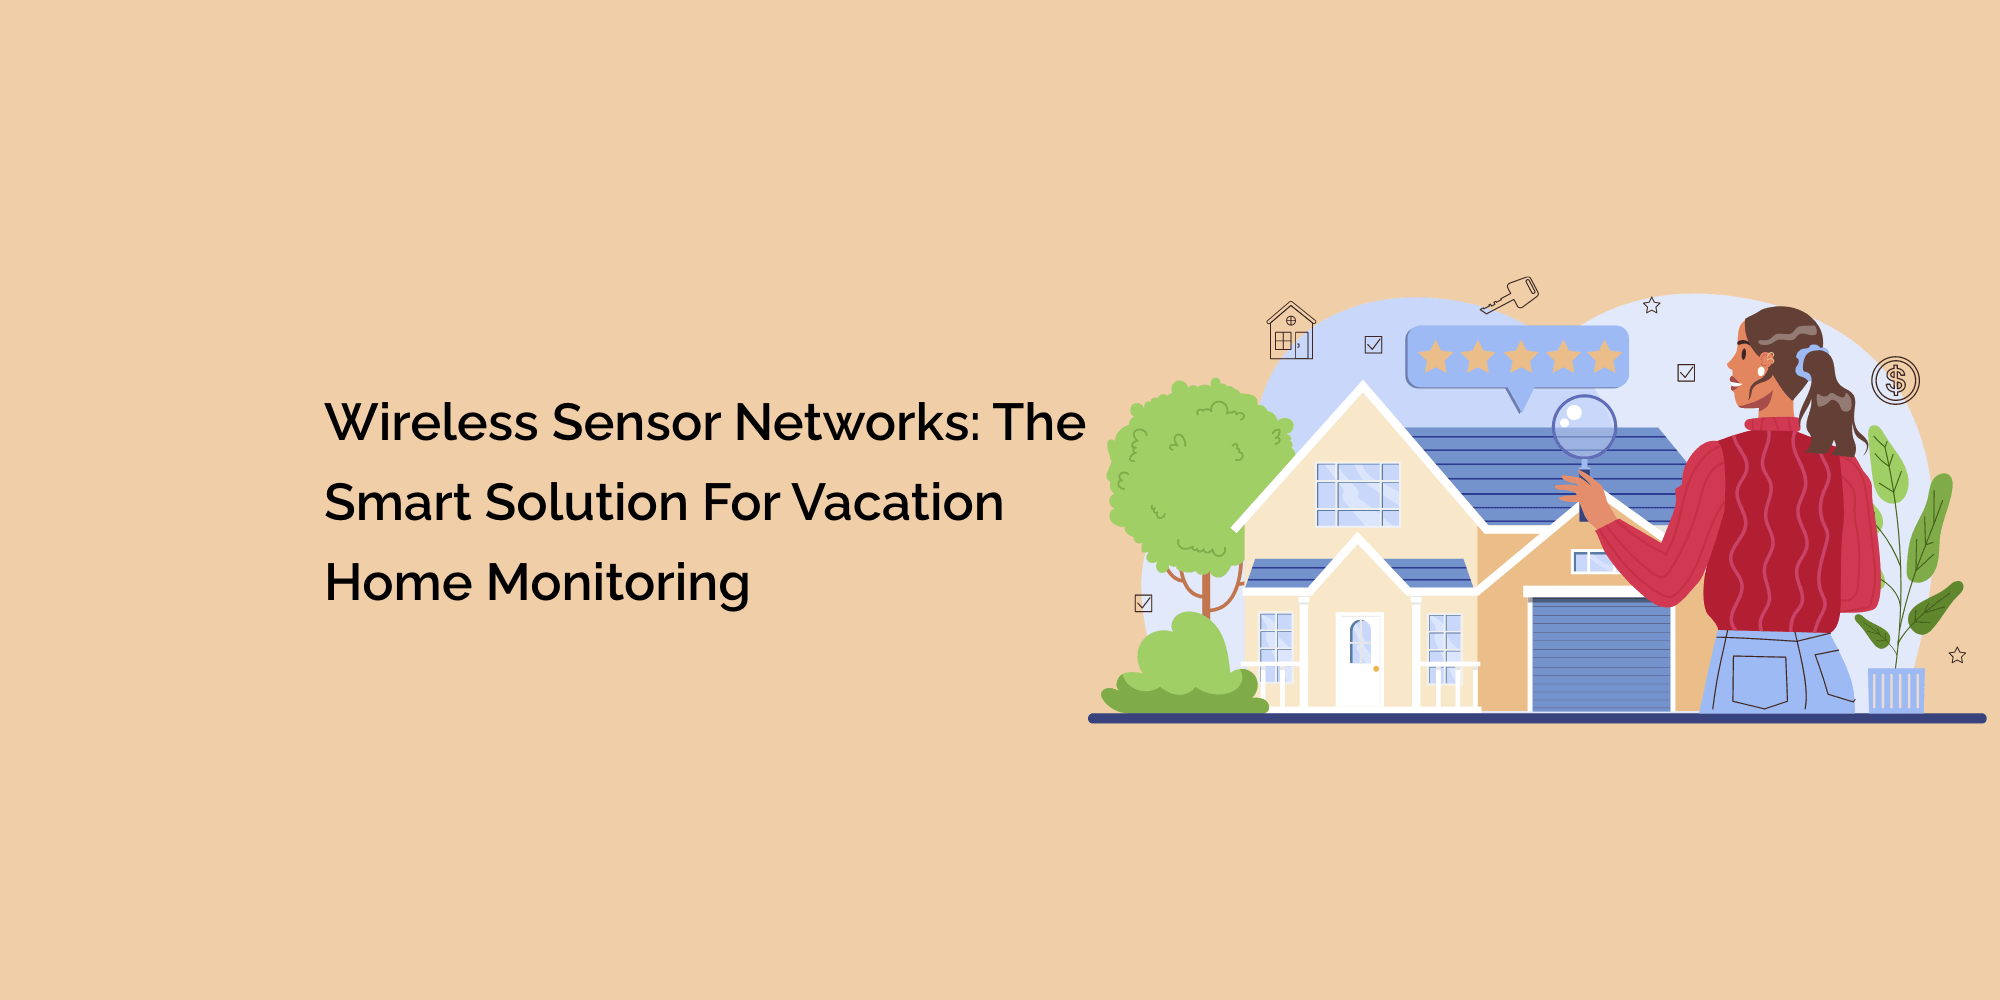 Wireless Sensor Networks: The Smart Solution for Vacation Home Monitoring